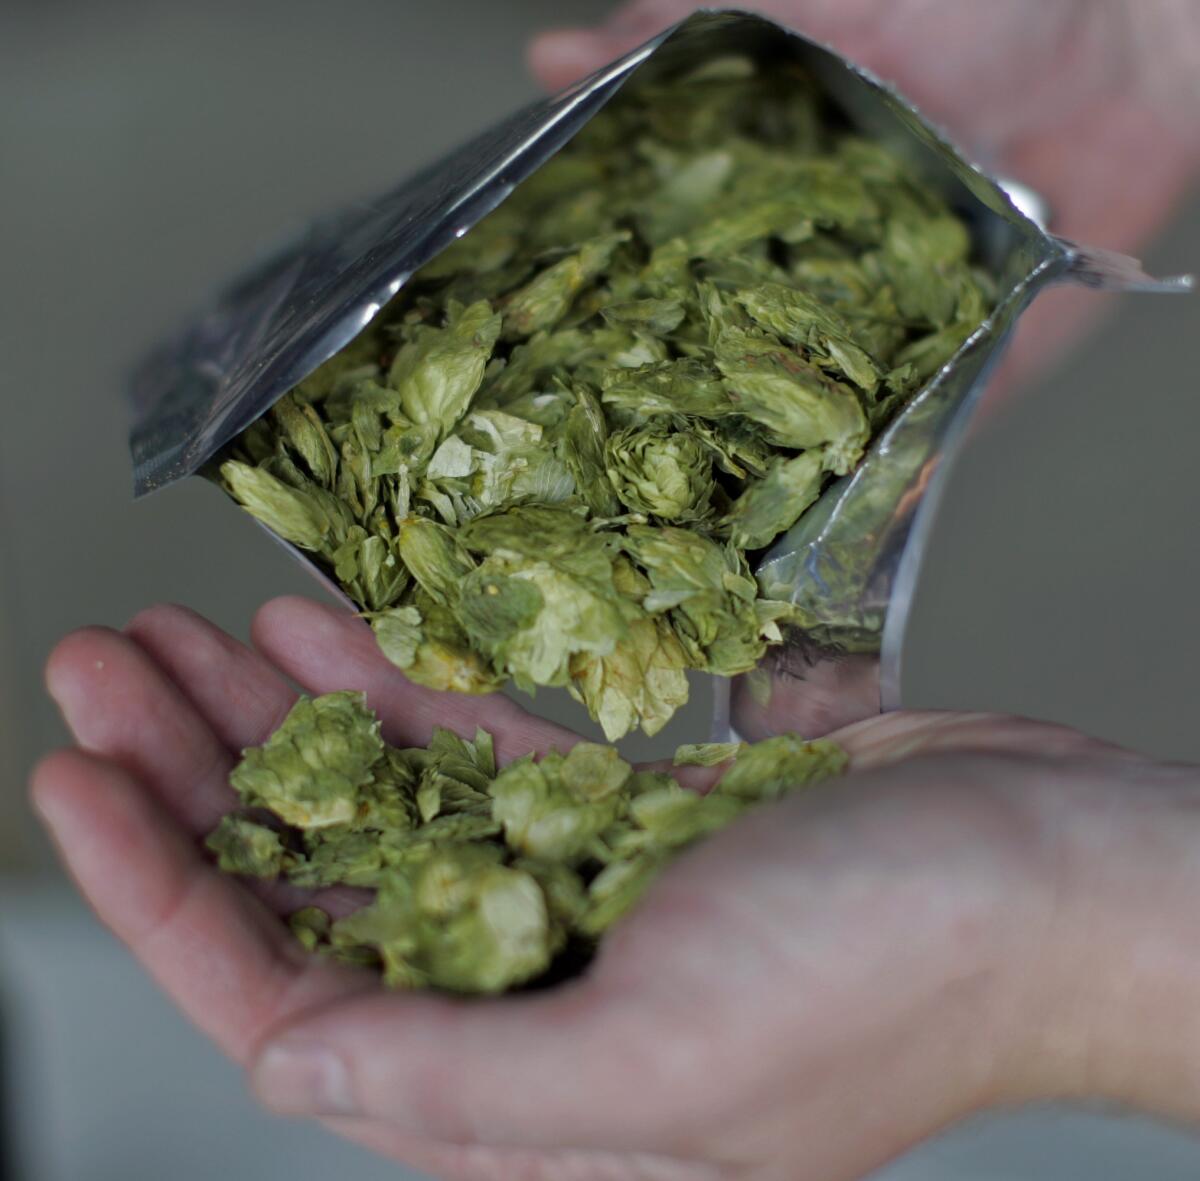 Hops in their raw state, before being brewed into one of the many IPAs that eschew balance for flavor.